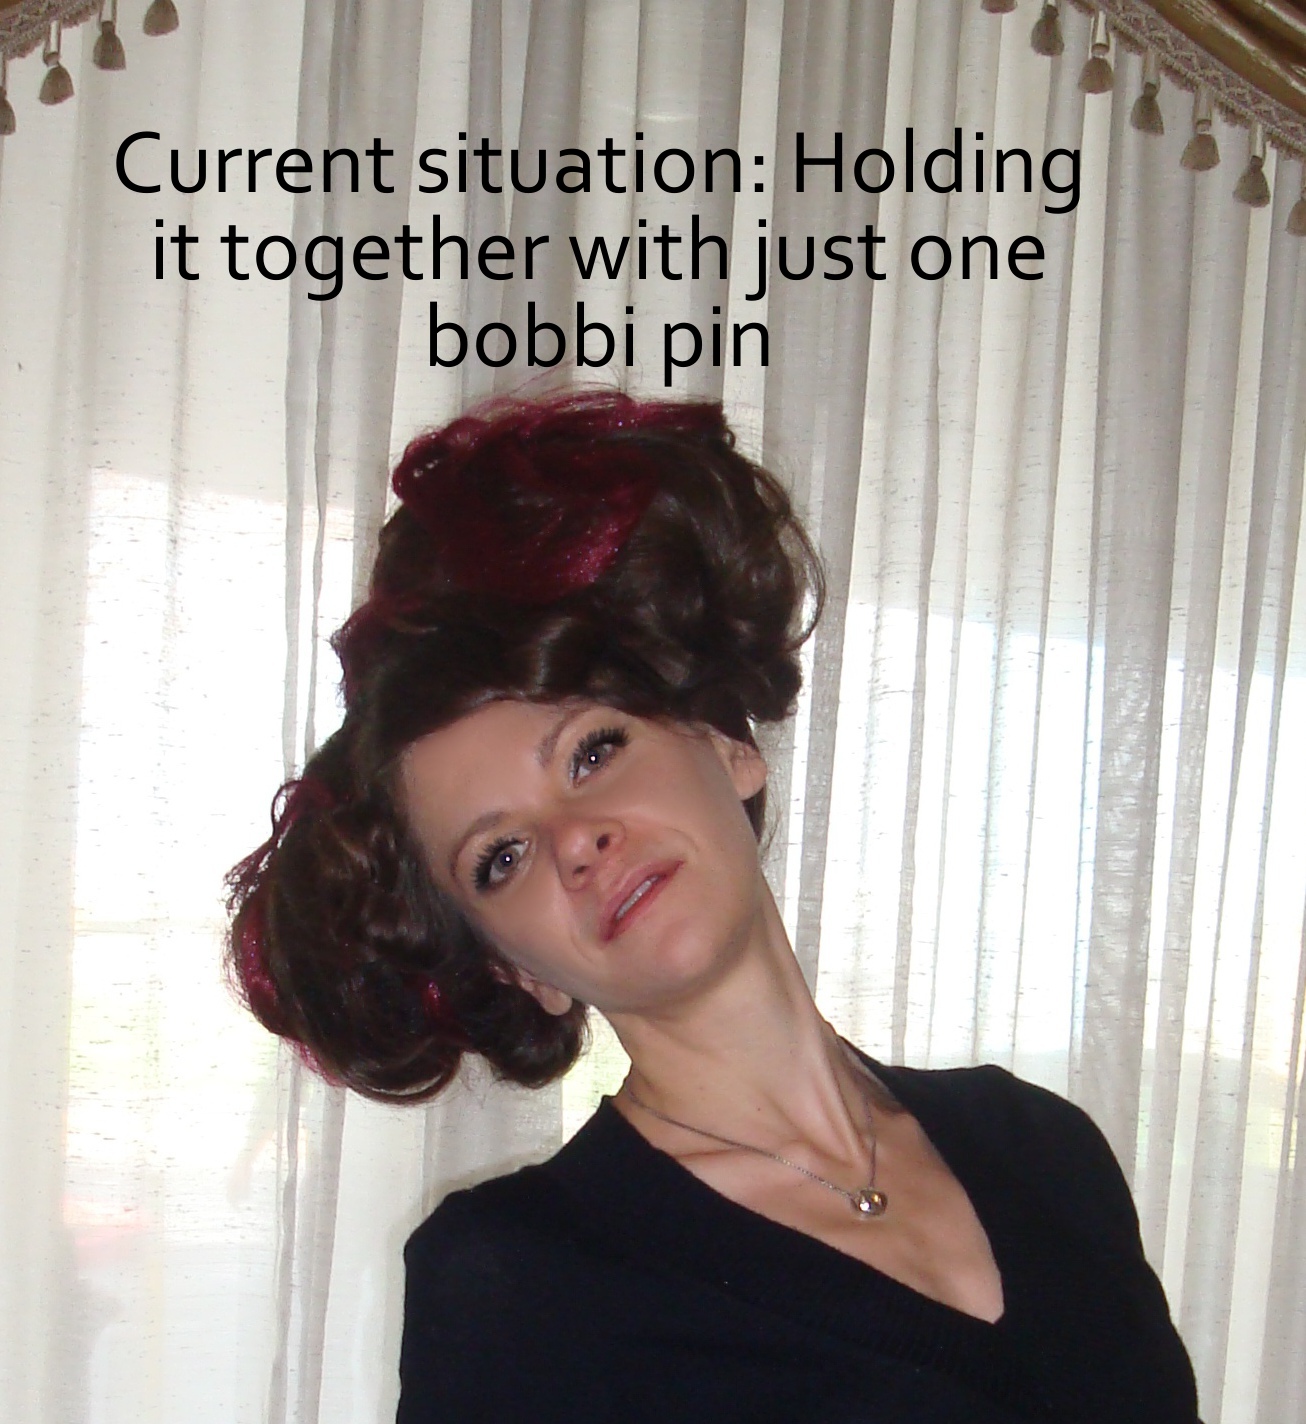 hair coloring - Current situation Holding it together with just one bobbi pin